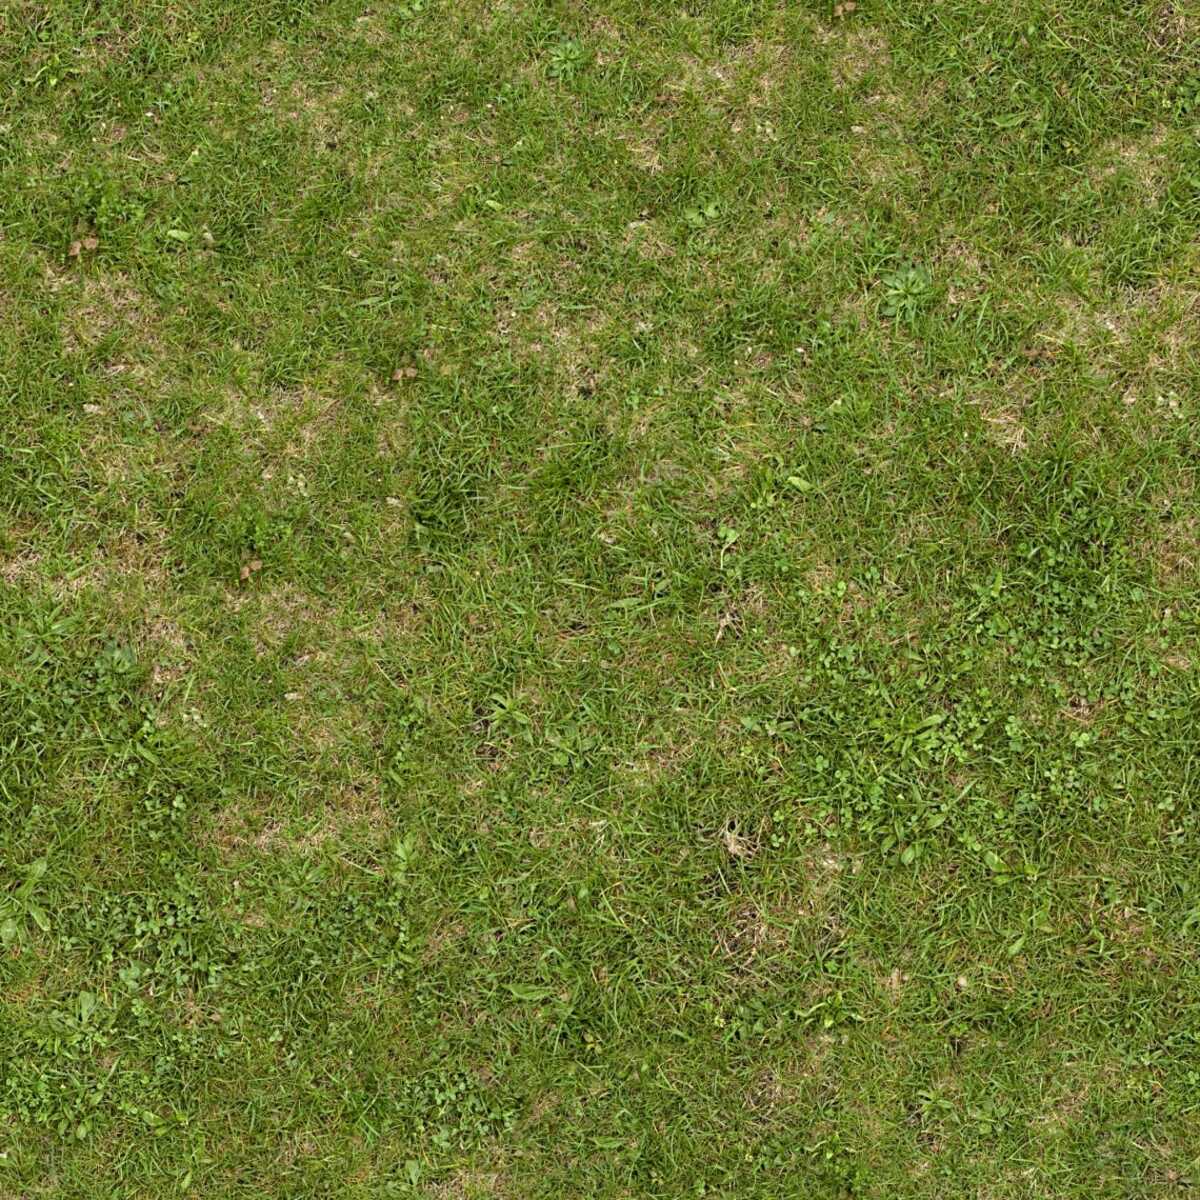 How To Fix Patchy New Grass